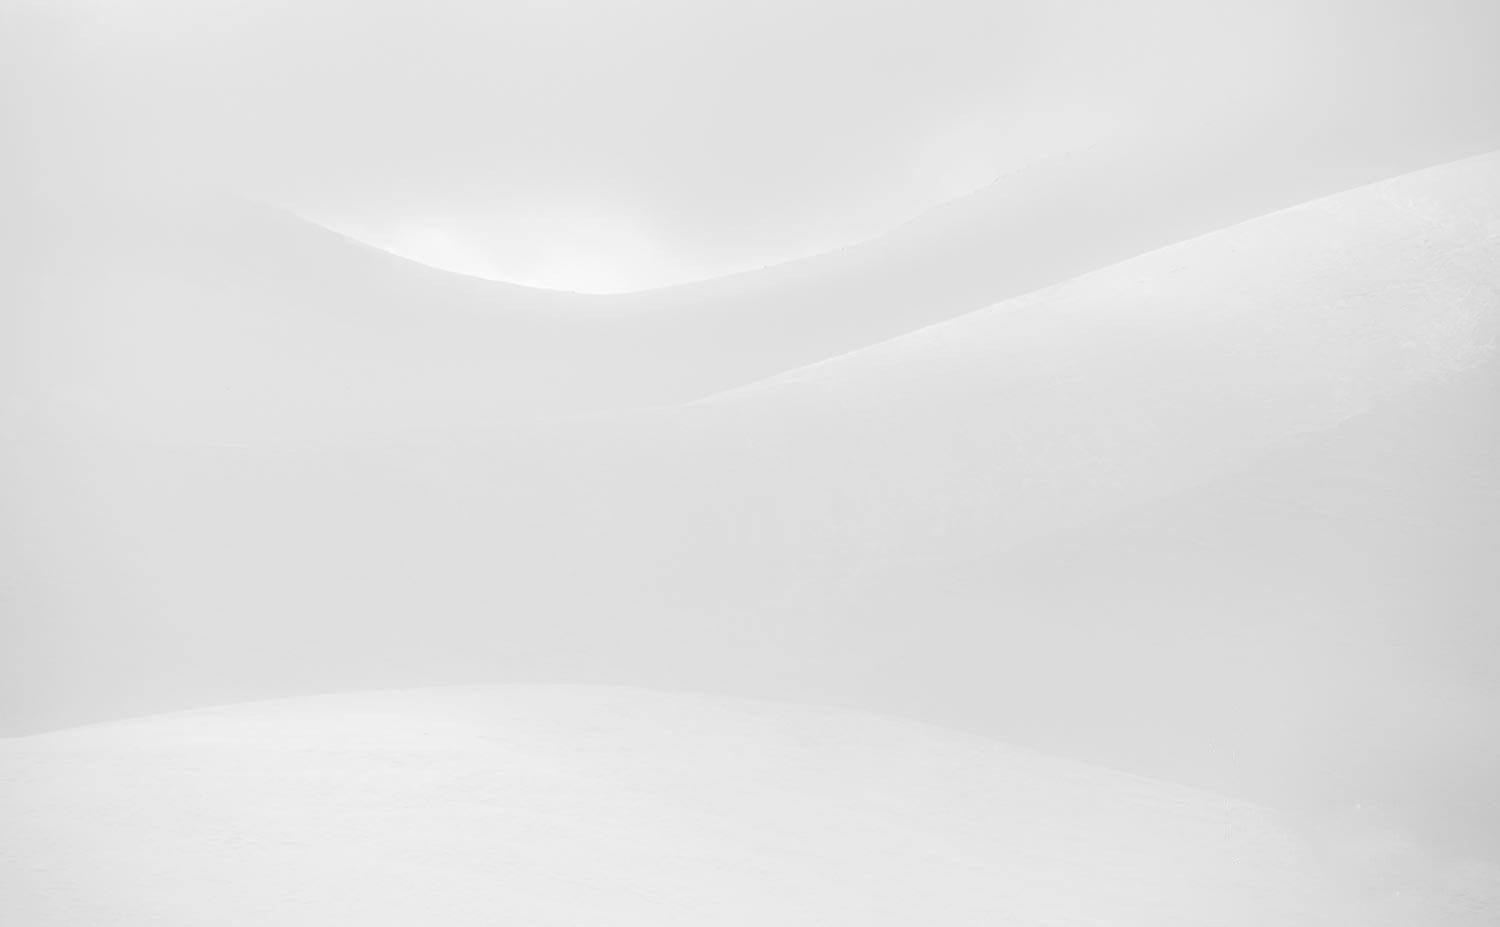 A static solid white texture with a waved line on it, having some smoke-colored combination as well, Curves